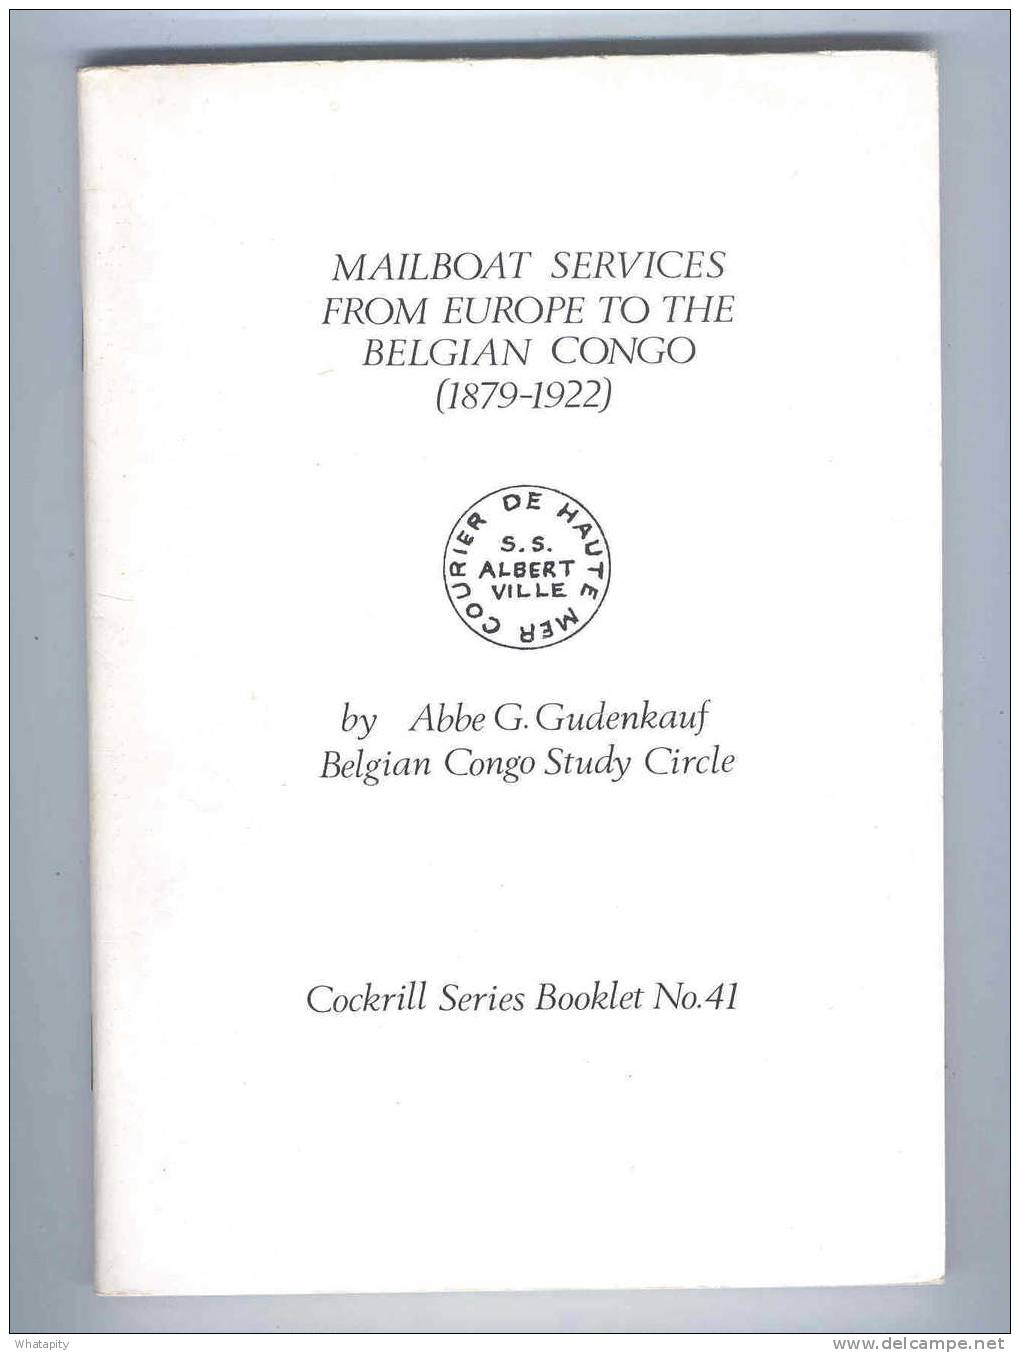 Mailboat Services From Europe To Belgian Congo By Abbé Gudenkauf , 1982 , Cockrill Series , 84 Pages  --  B0/181 - Zeepost & Postgeschiedenis